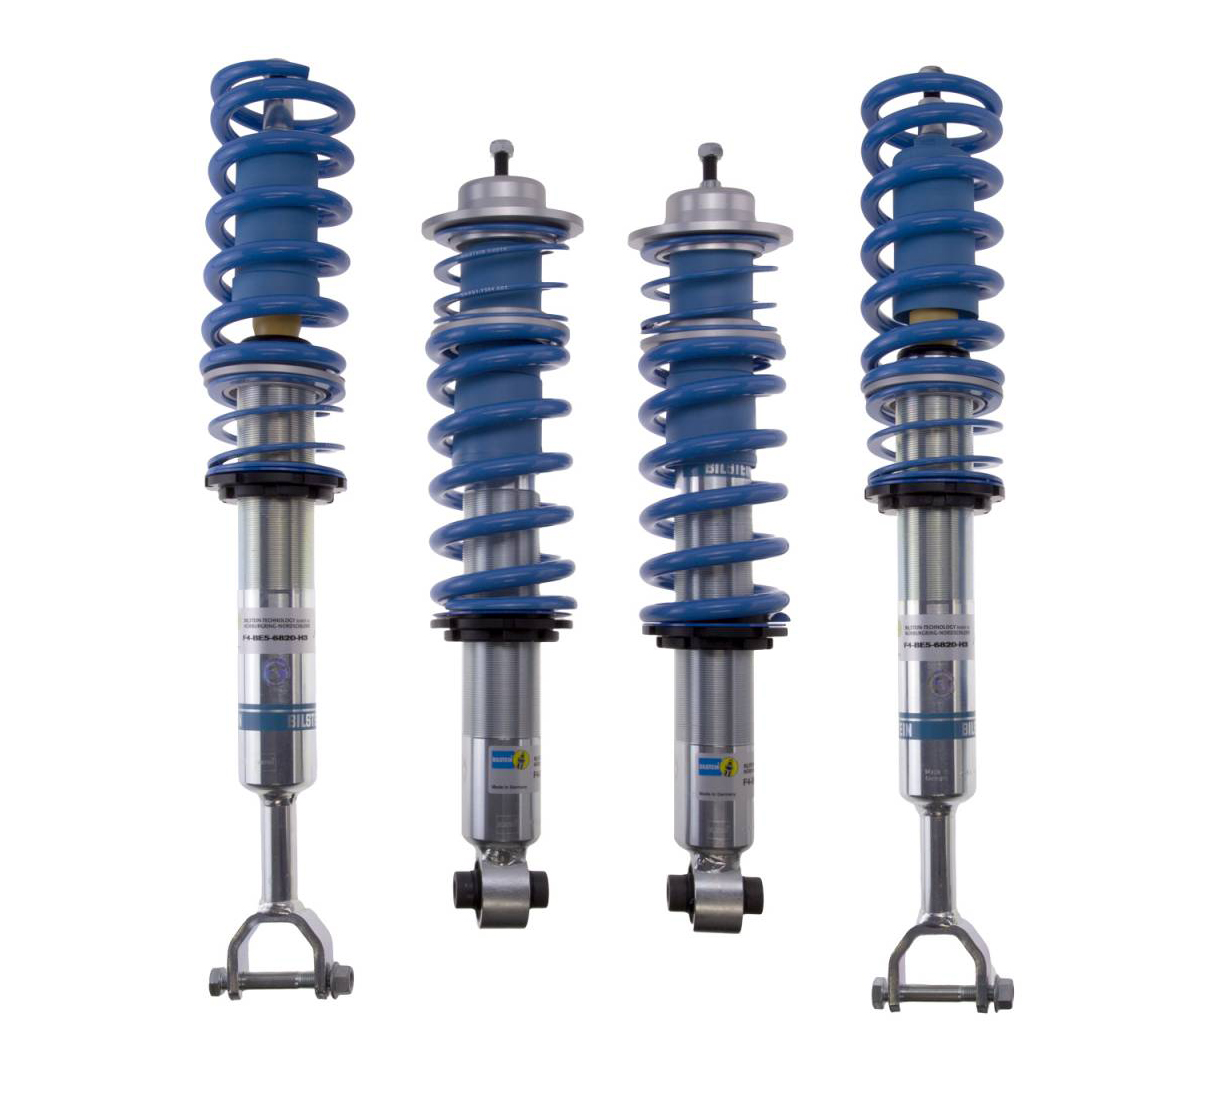 Bilstein B14 PSS Coilovers for daily driving